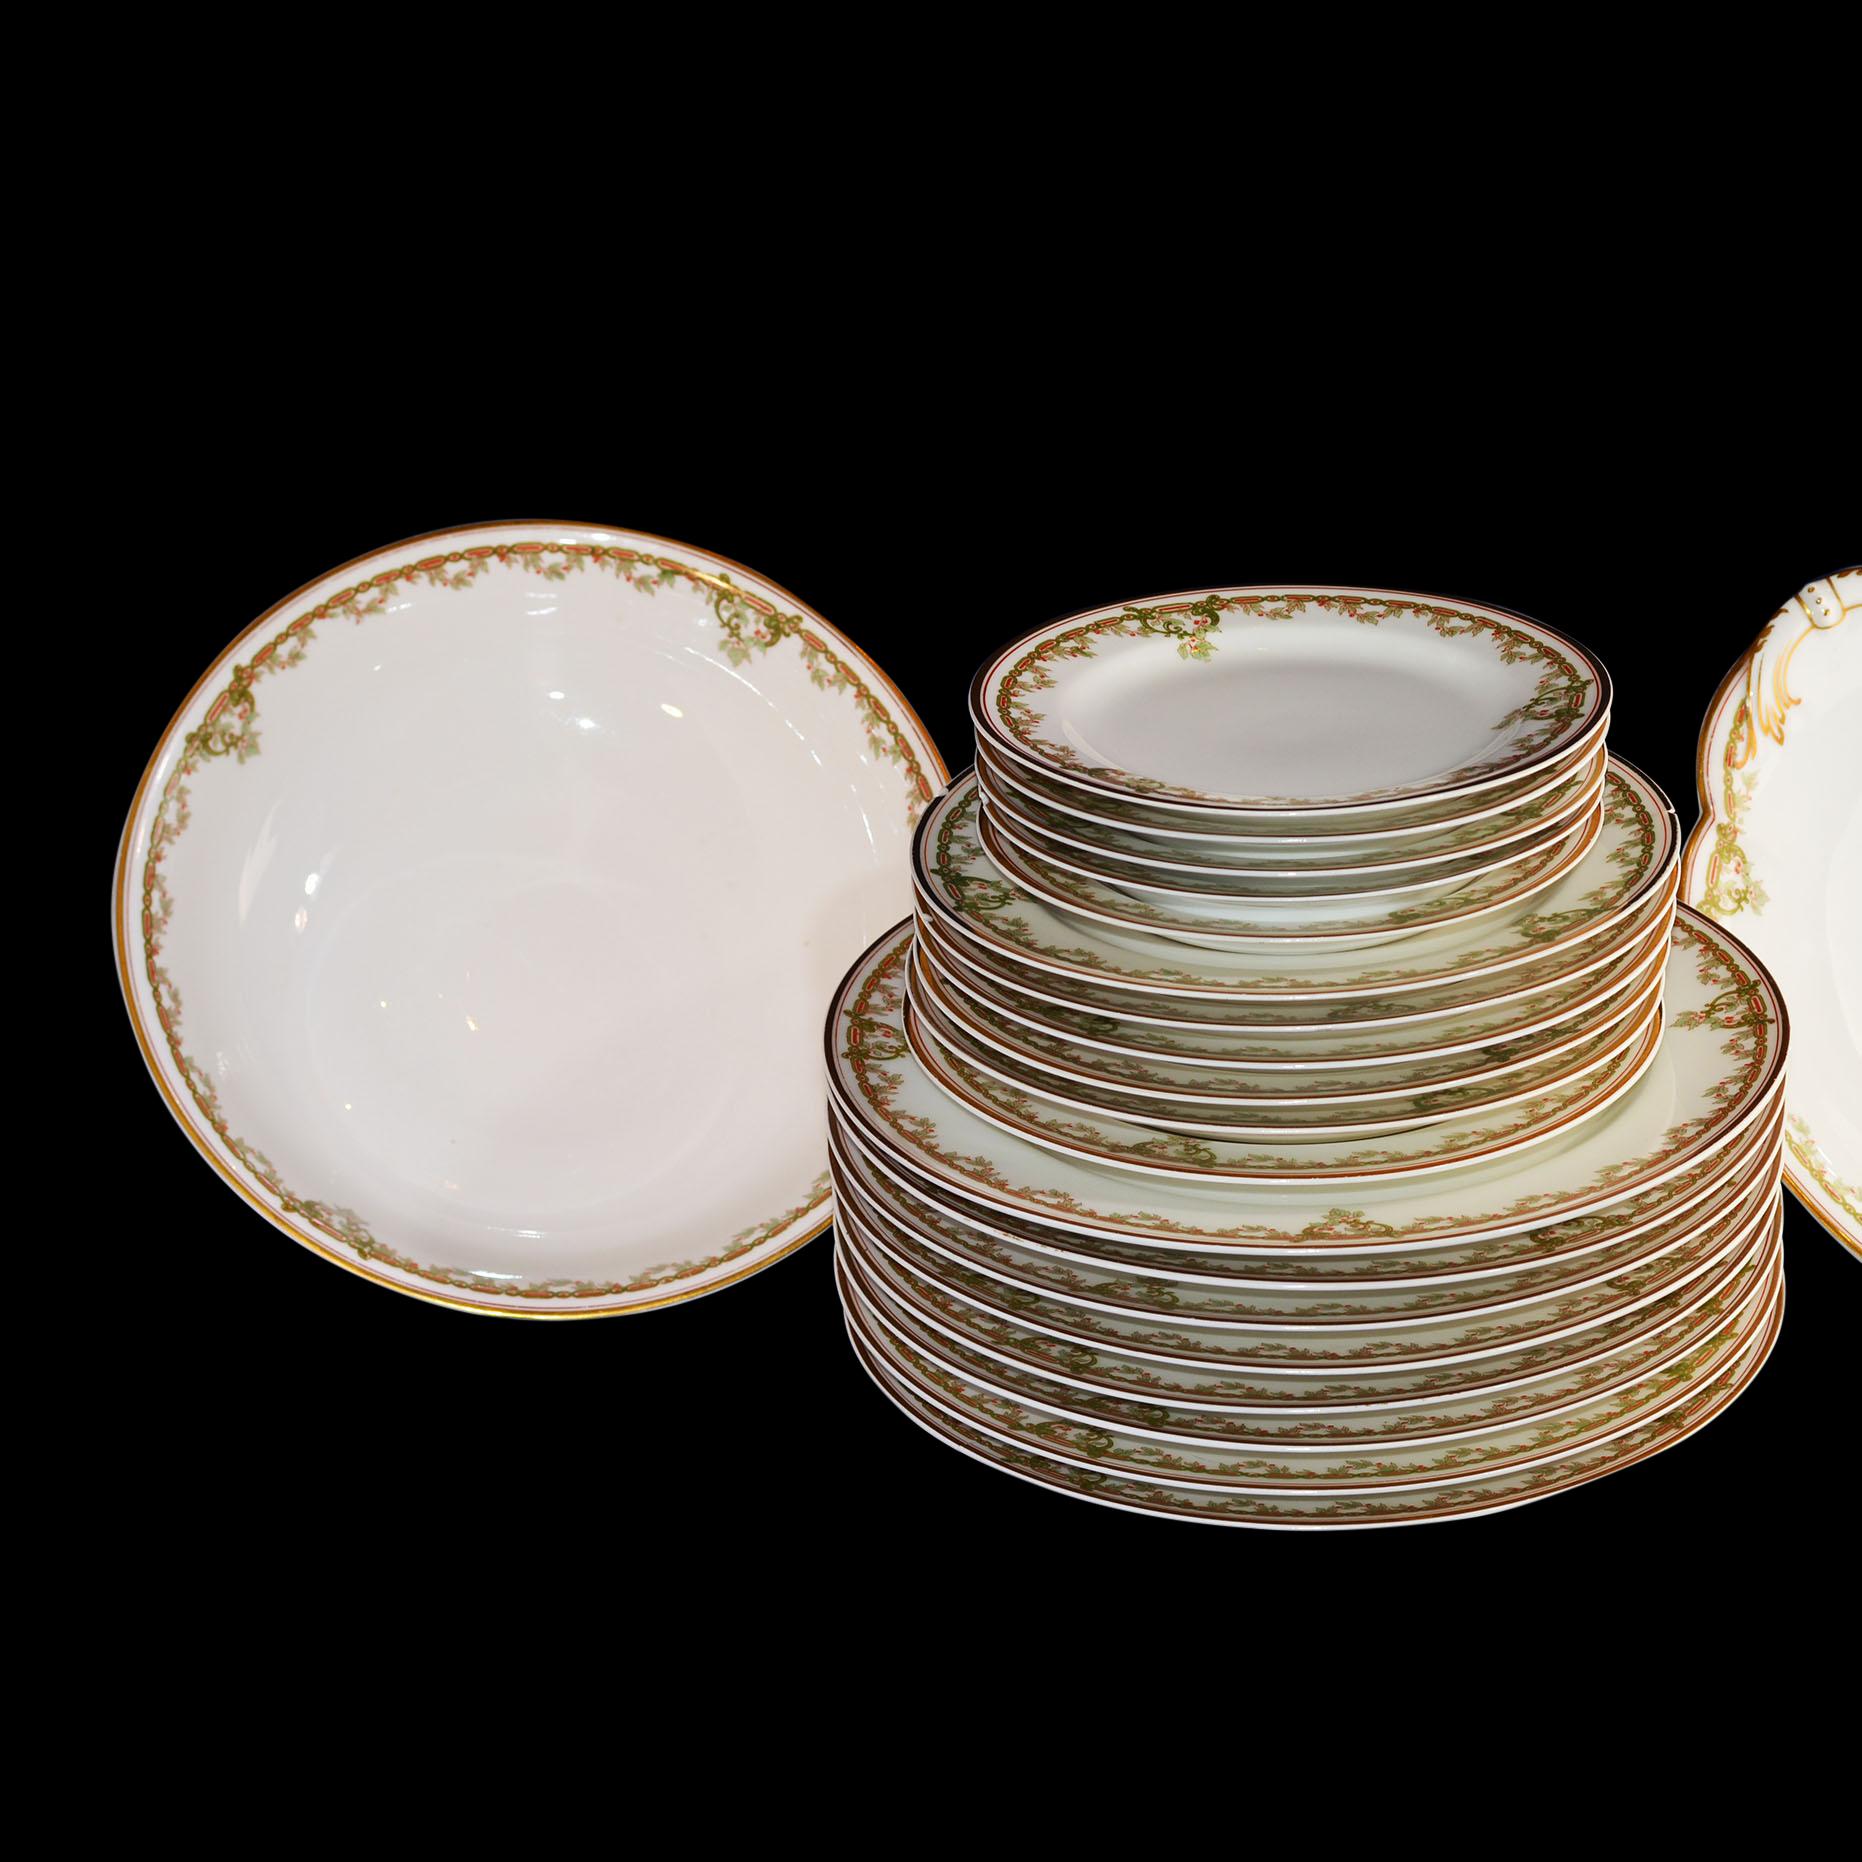 21 Piece set of Haviland dinner ware with 2 serving bowls. The design has a lovely gold rim with a greenery and berry design. We have not been able to identify the pattern, but the serveware is marked Underglaze Haviland, France in Green (circa